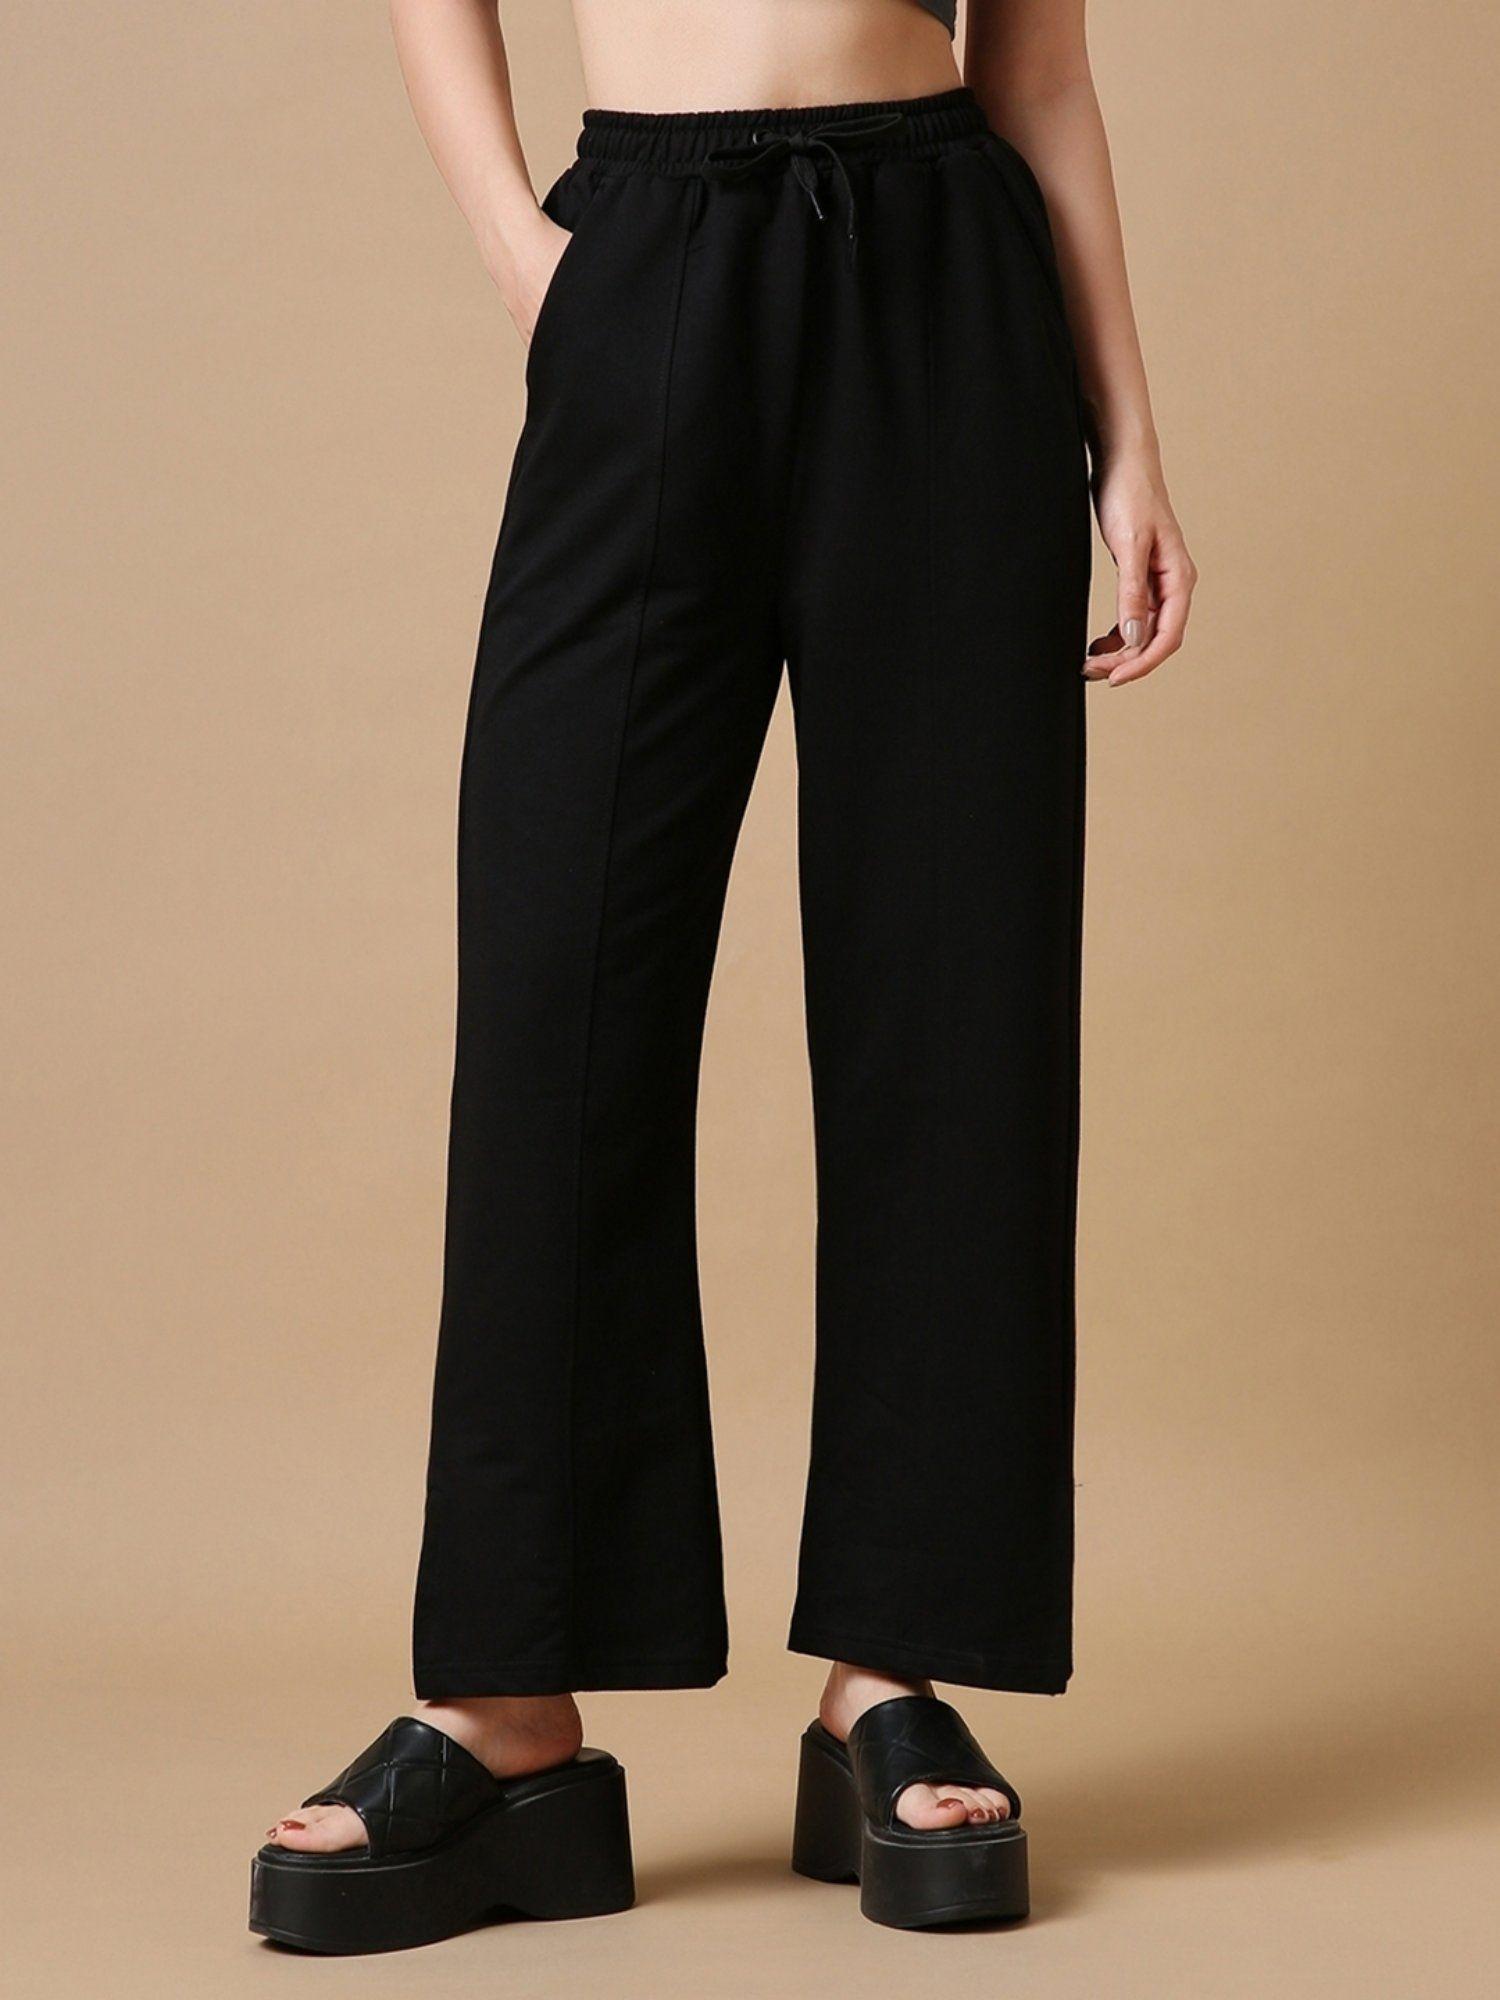 women's black relaxed fit pants